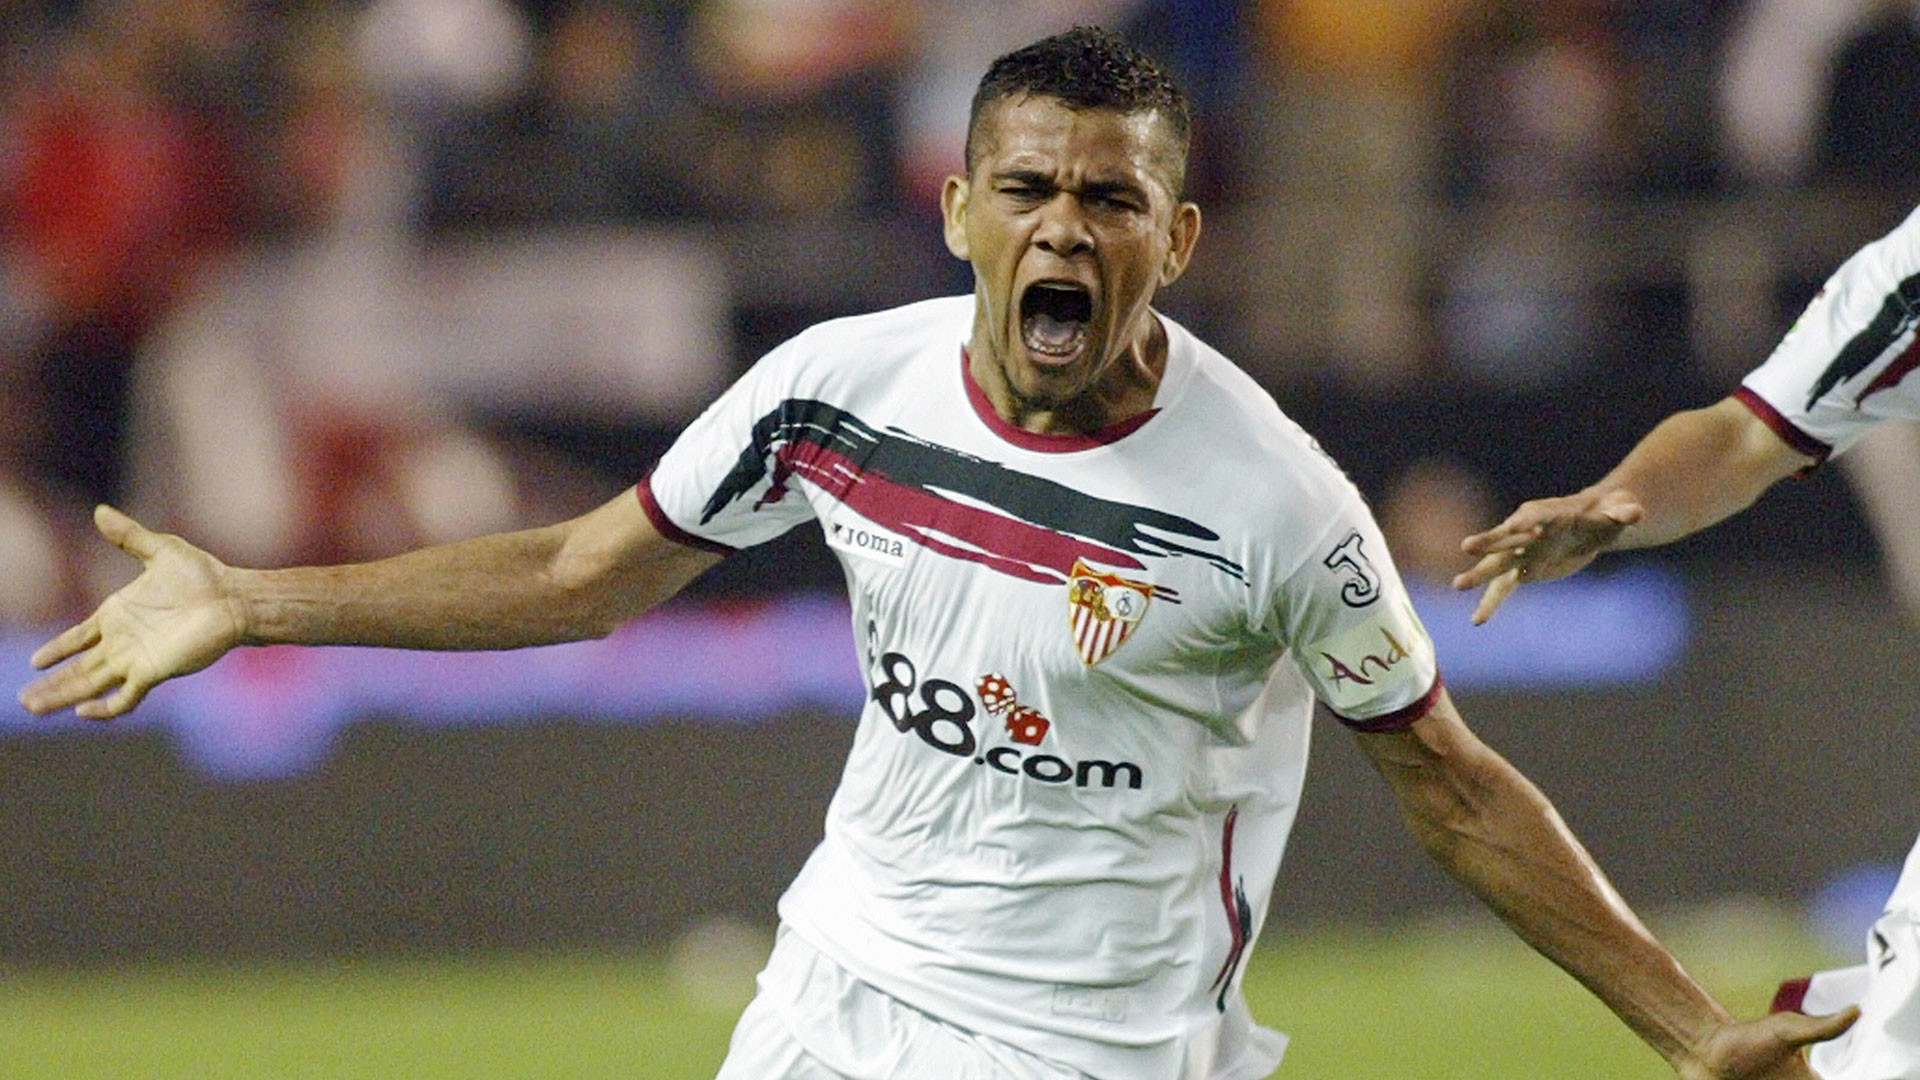 1920x1080 Alves' European career started in Sevilla, where he quickly earned a  reputation as being a lethal attacking threat and became one of the most  sought-after ...